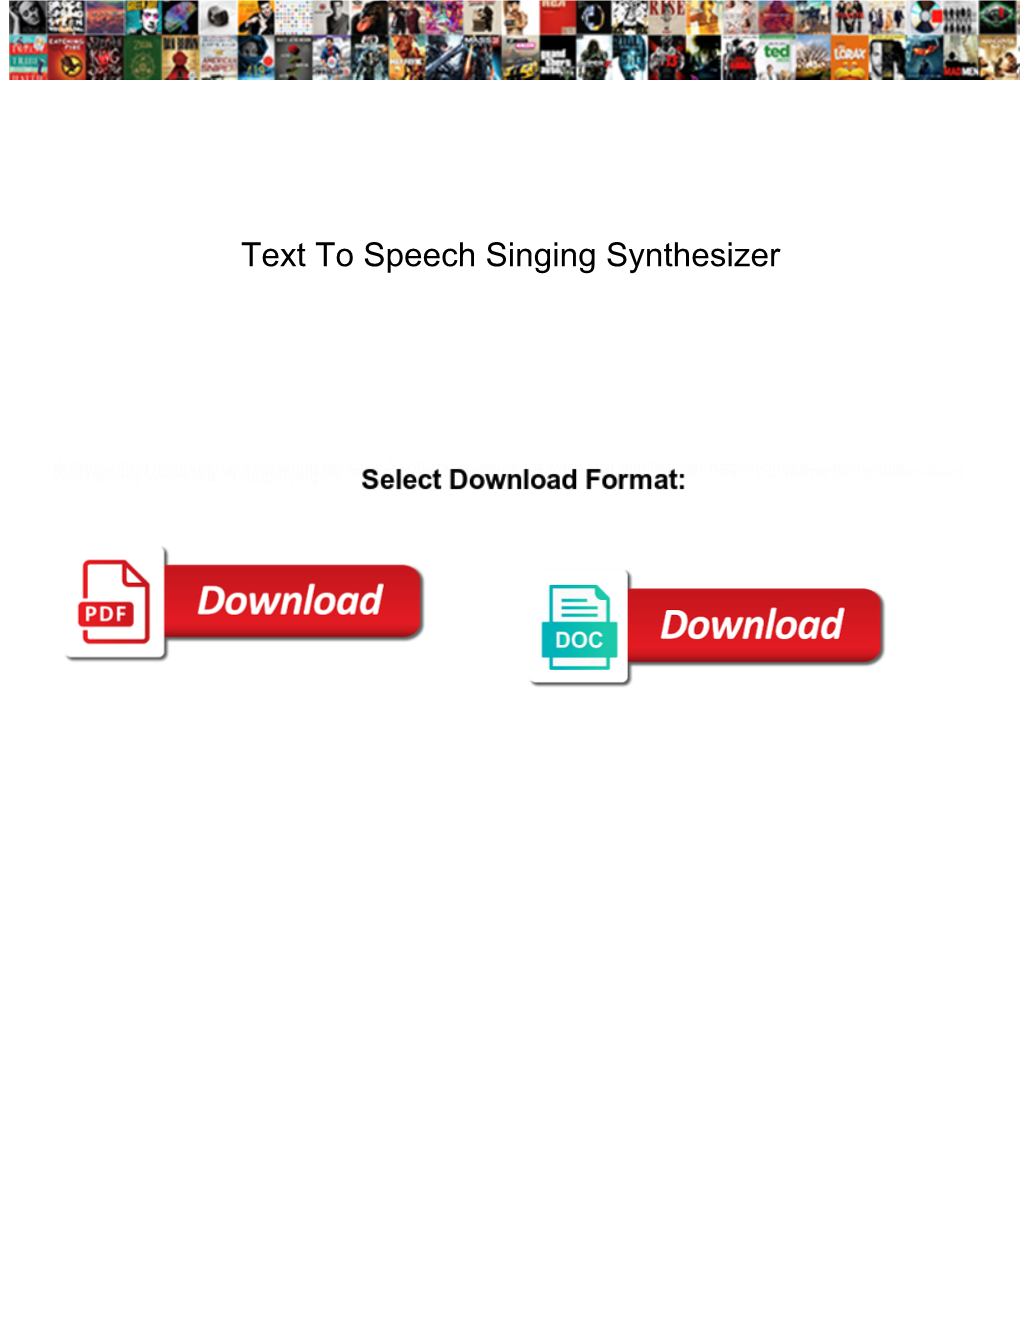 Text to Speech Singing Synthesizer